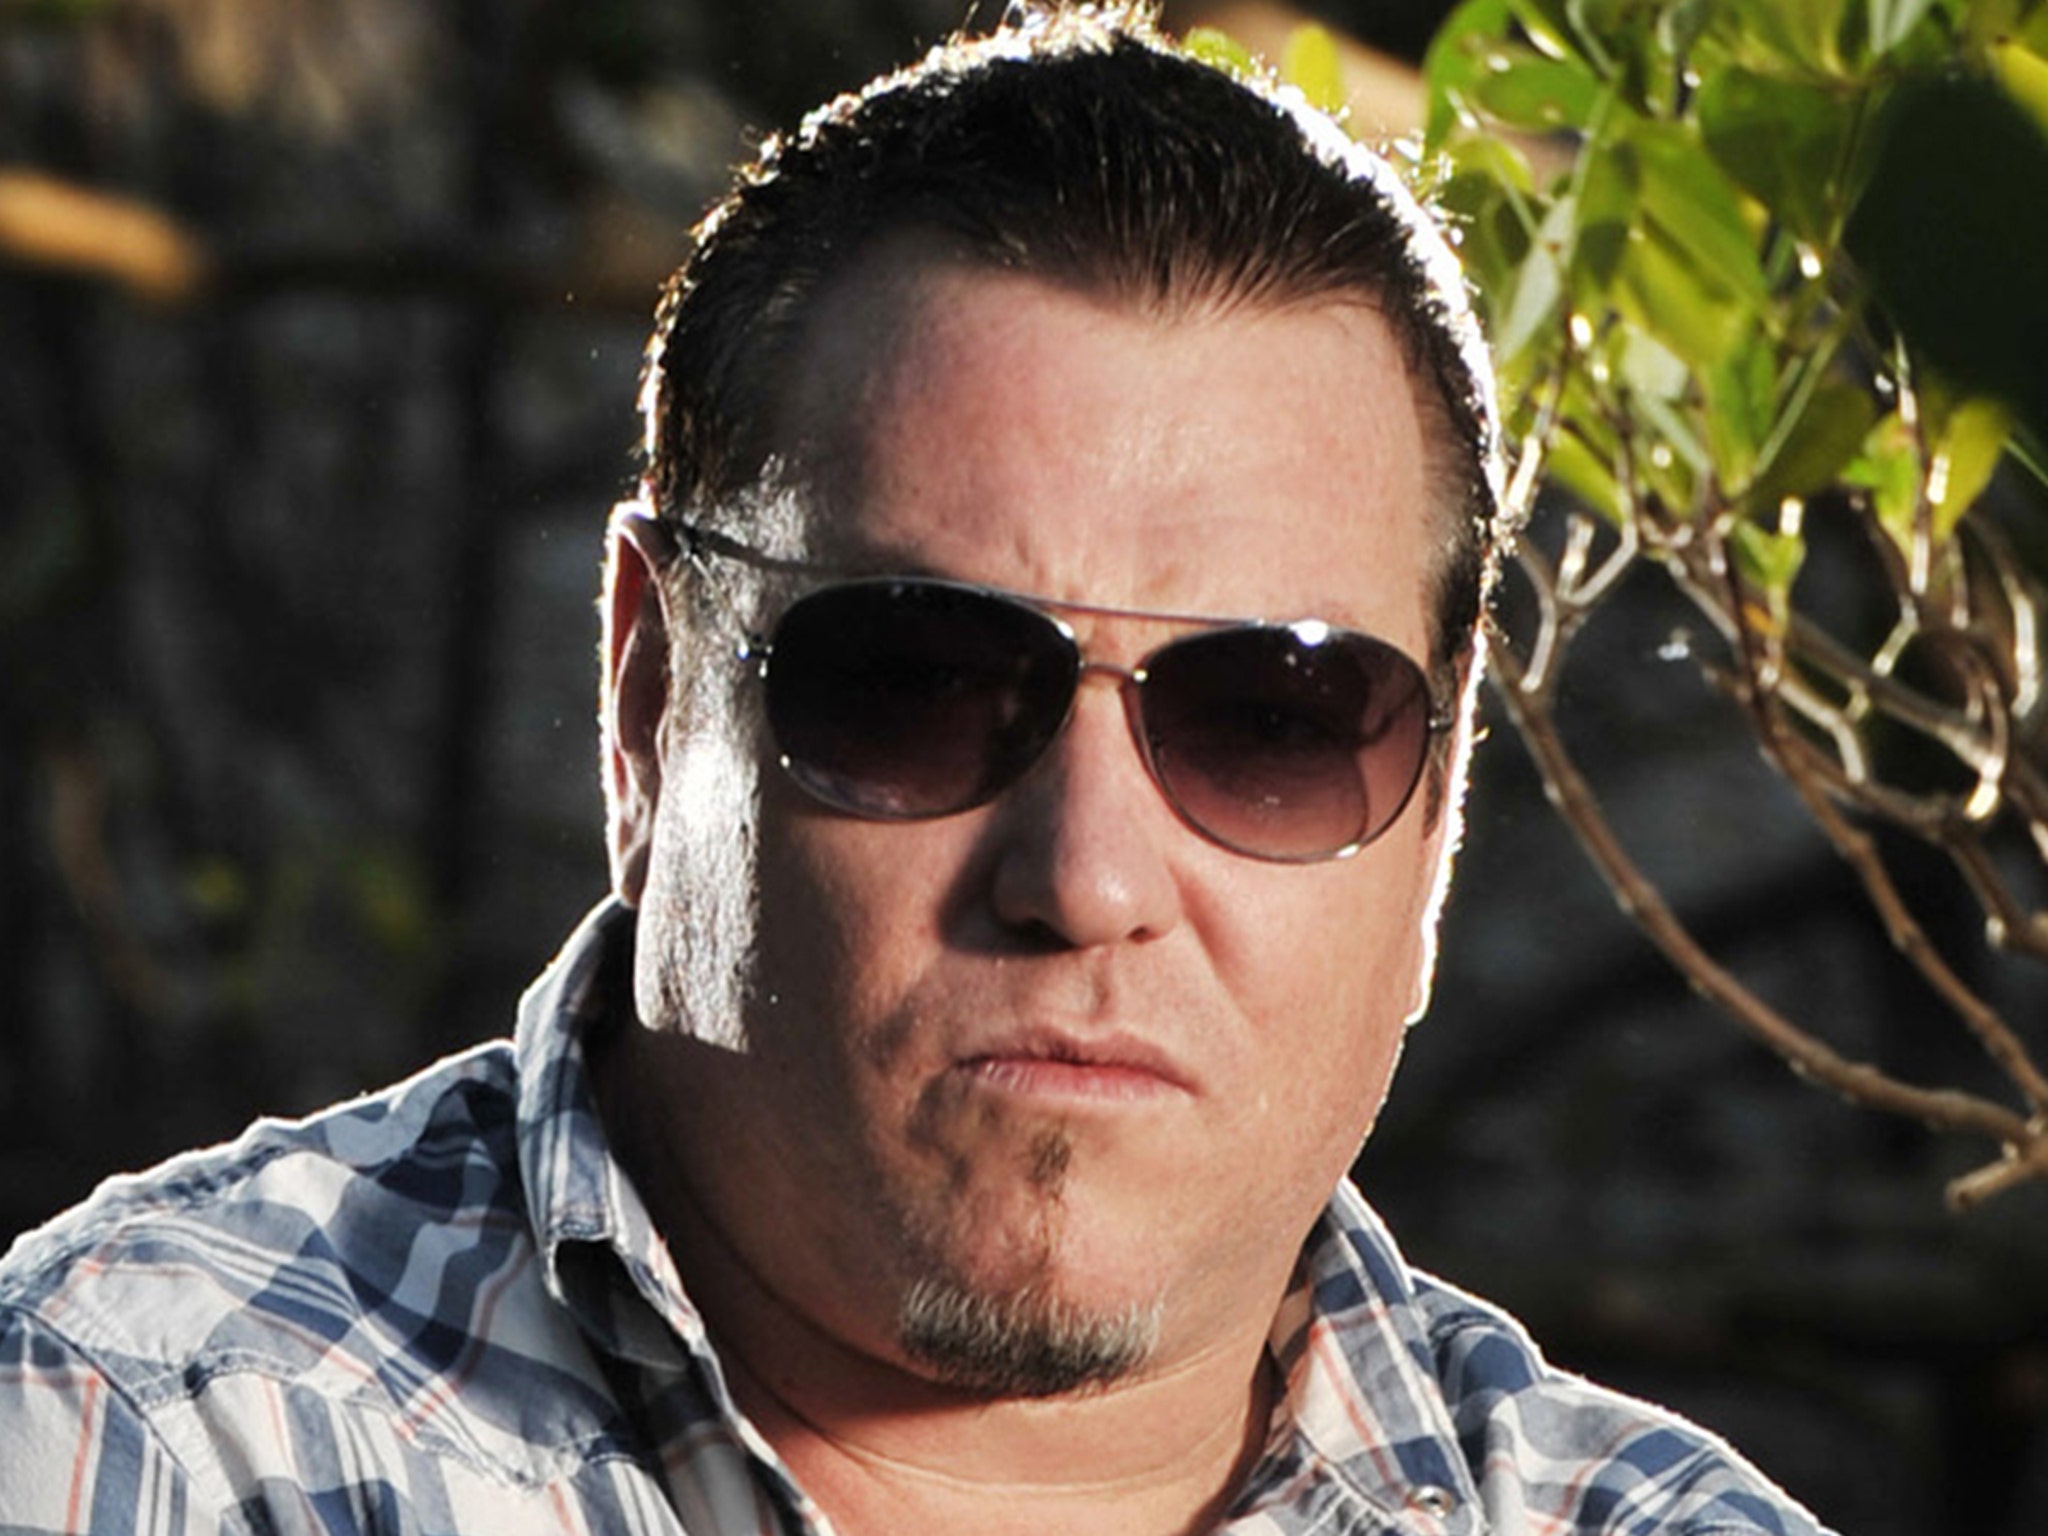 Smash Mouth's Steve Harwell on hiatus due to heart issues